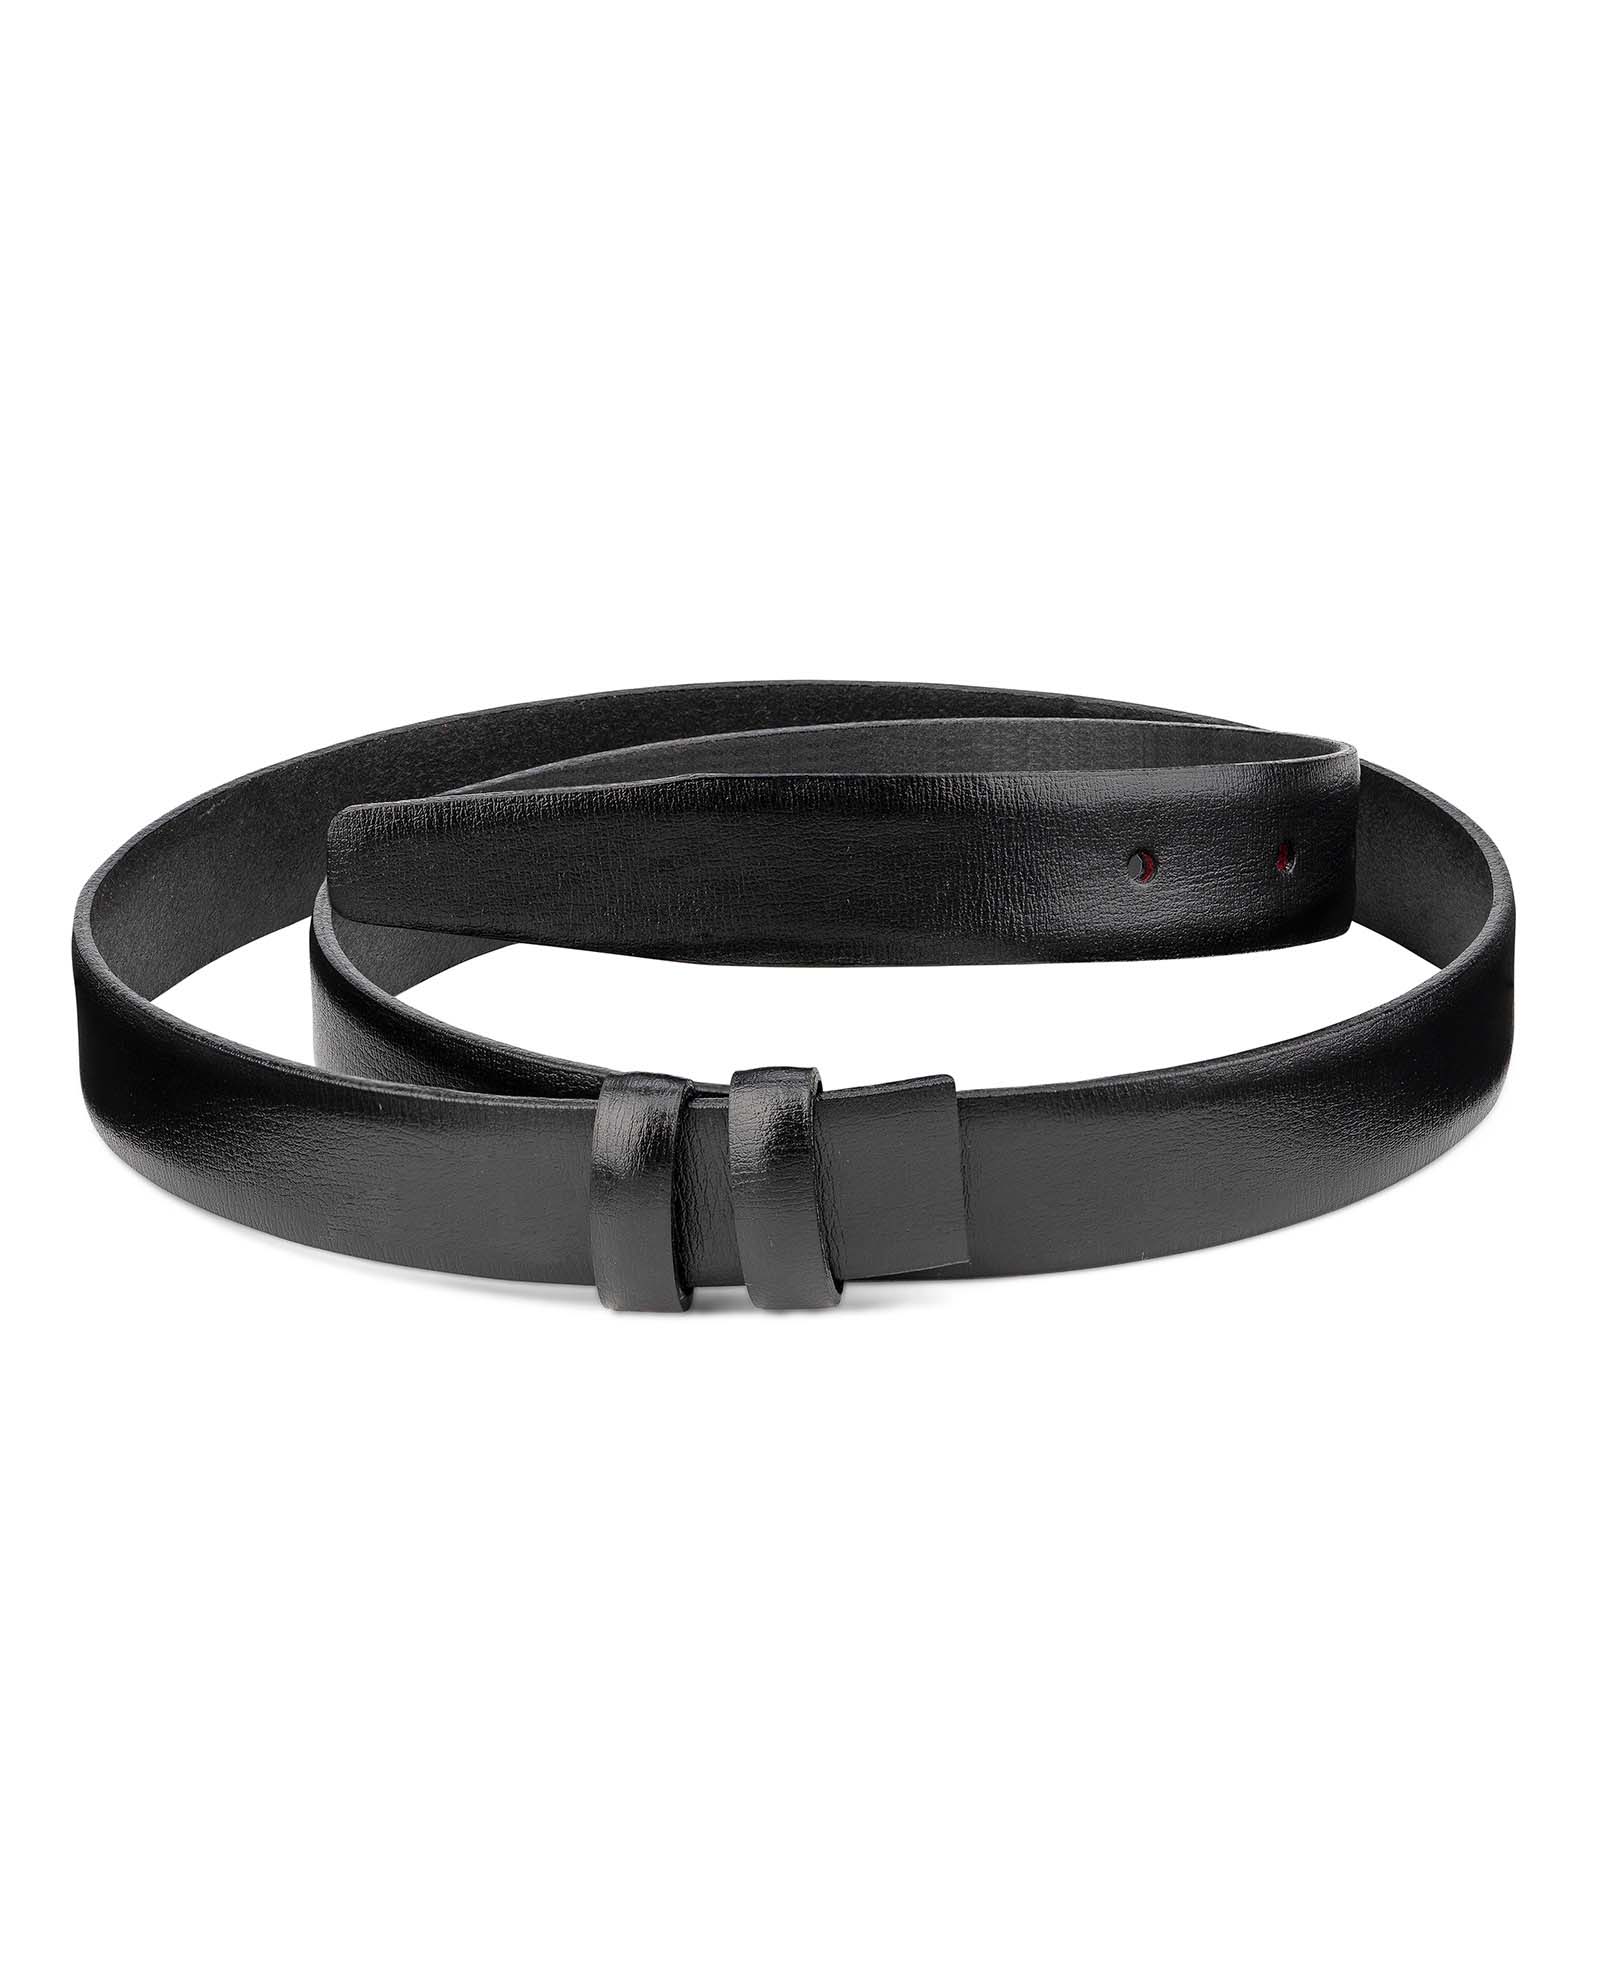 Buy 1 inch Belt Strap | Black Smooth Leather | Free Shipping